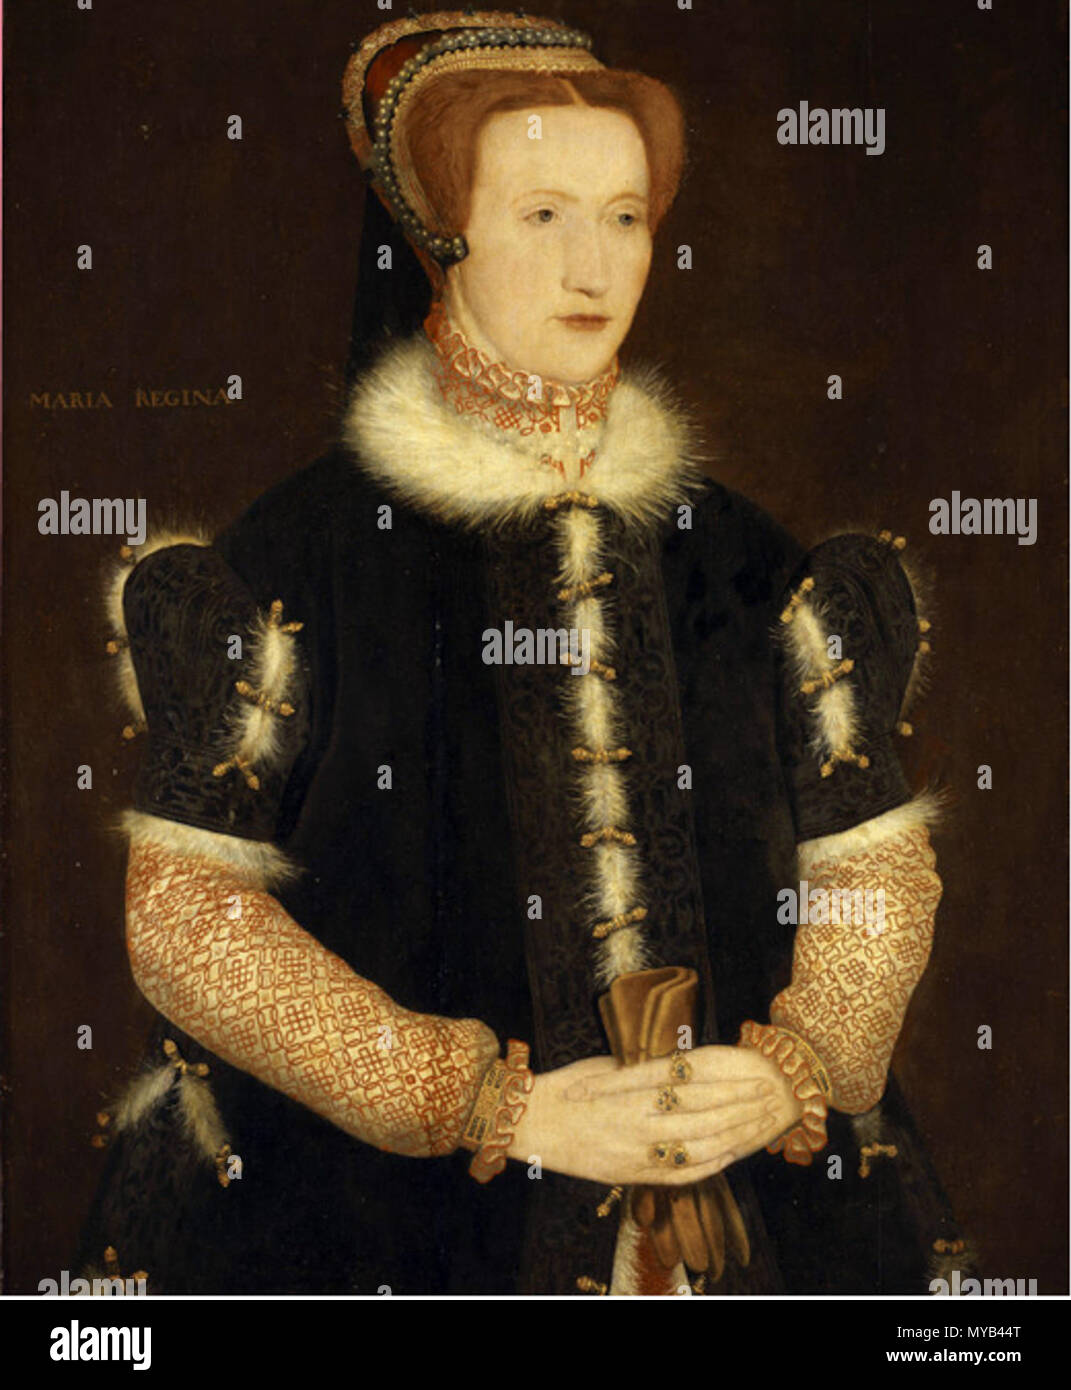 . Bess of Hardwick (later Elizabeth Countess of Shrewsbury) when Mistress St Lo, 1550s. A later inscription incorrectly identifies her as Mary I. 1550s. Unknown 73 Bess of Hardwick as Mistress St Lo Stock Photo